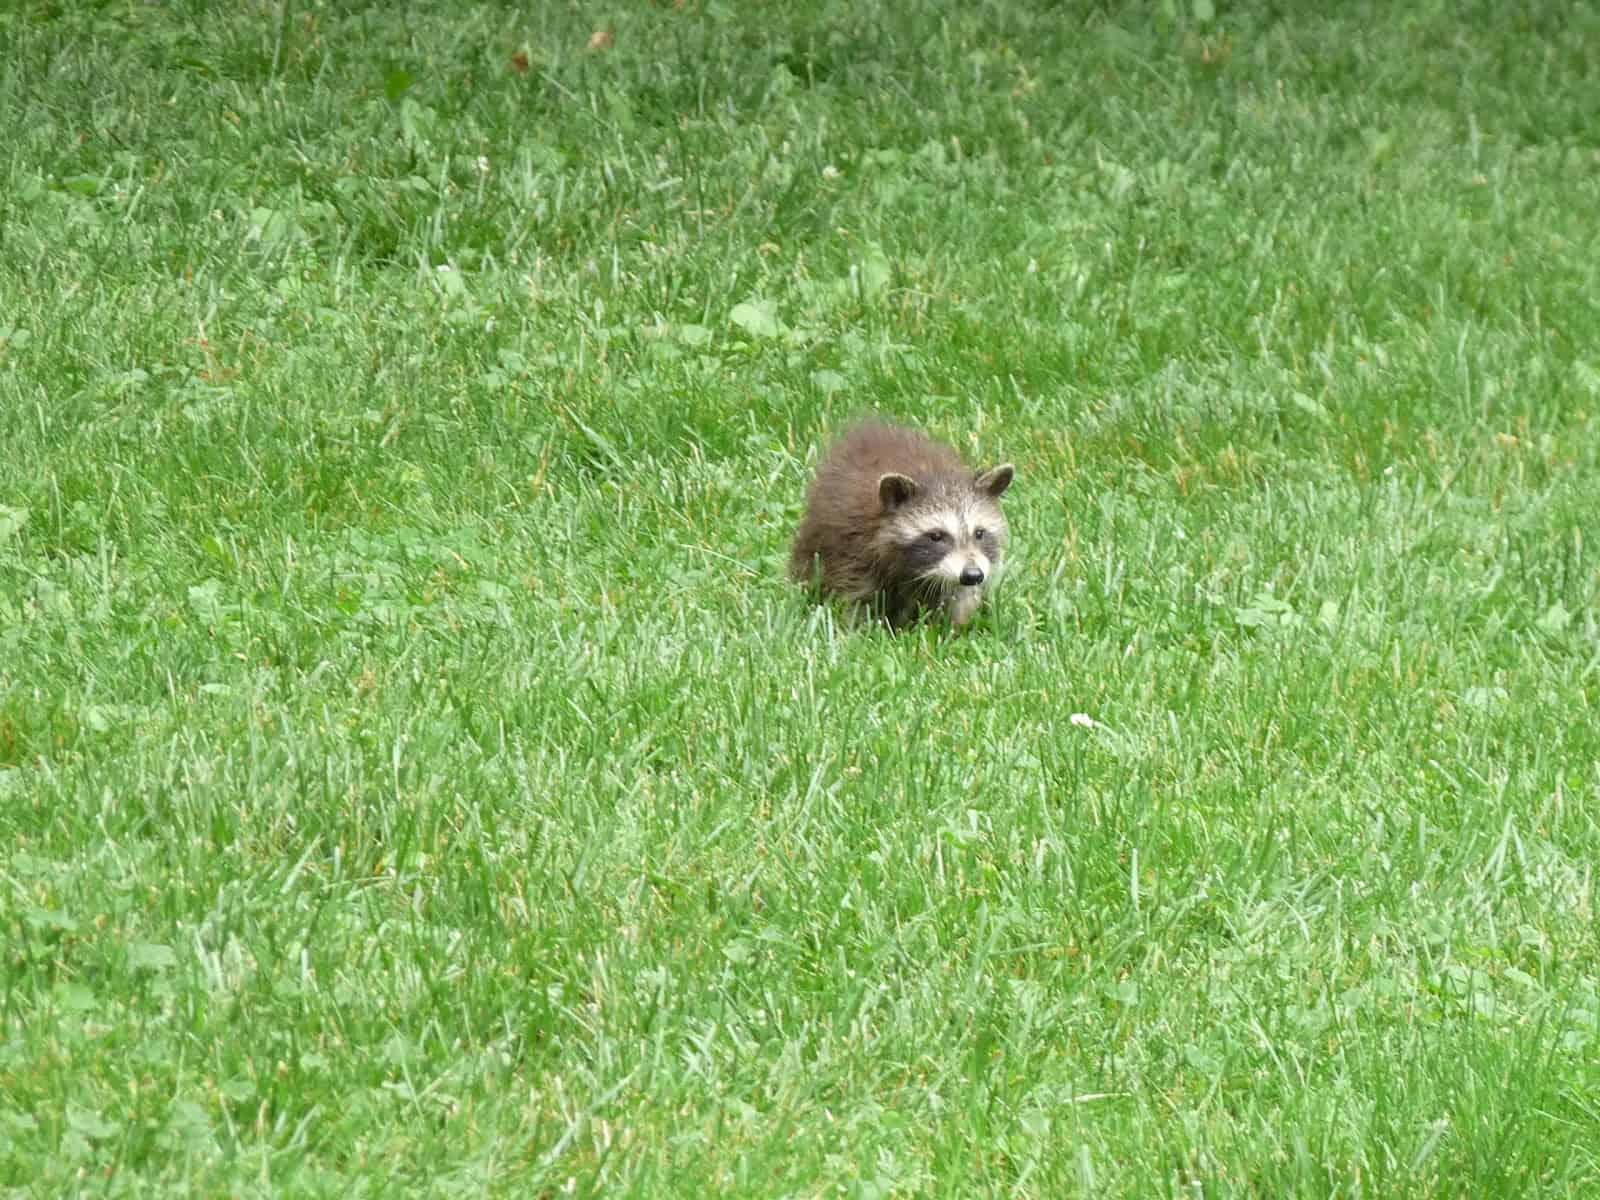 A raccoon crosses the Study lawn